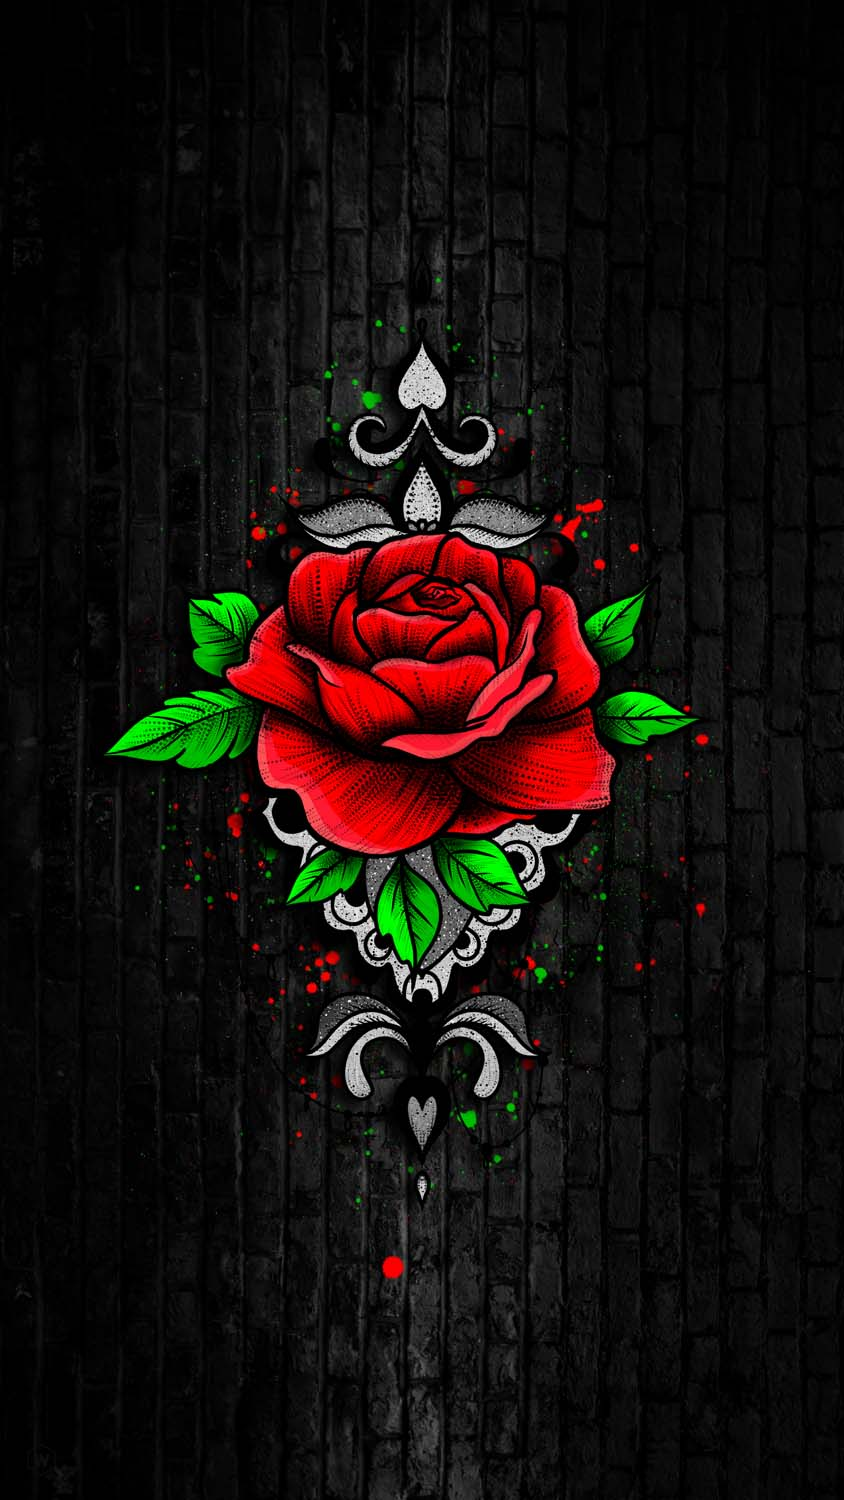 25 Beautiful Roses Wallpaper Backgrounds For iPhone  Red flower wallpaper  Red roses wallpaper Red wallpaper